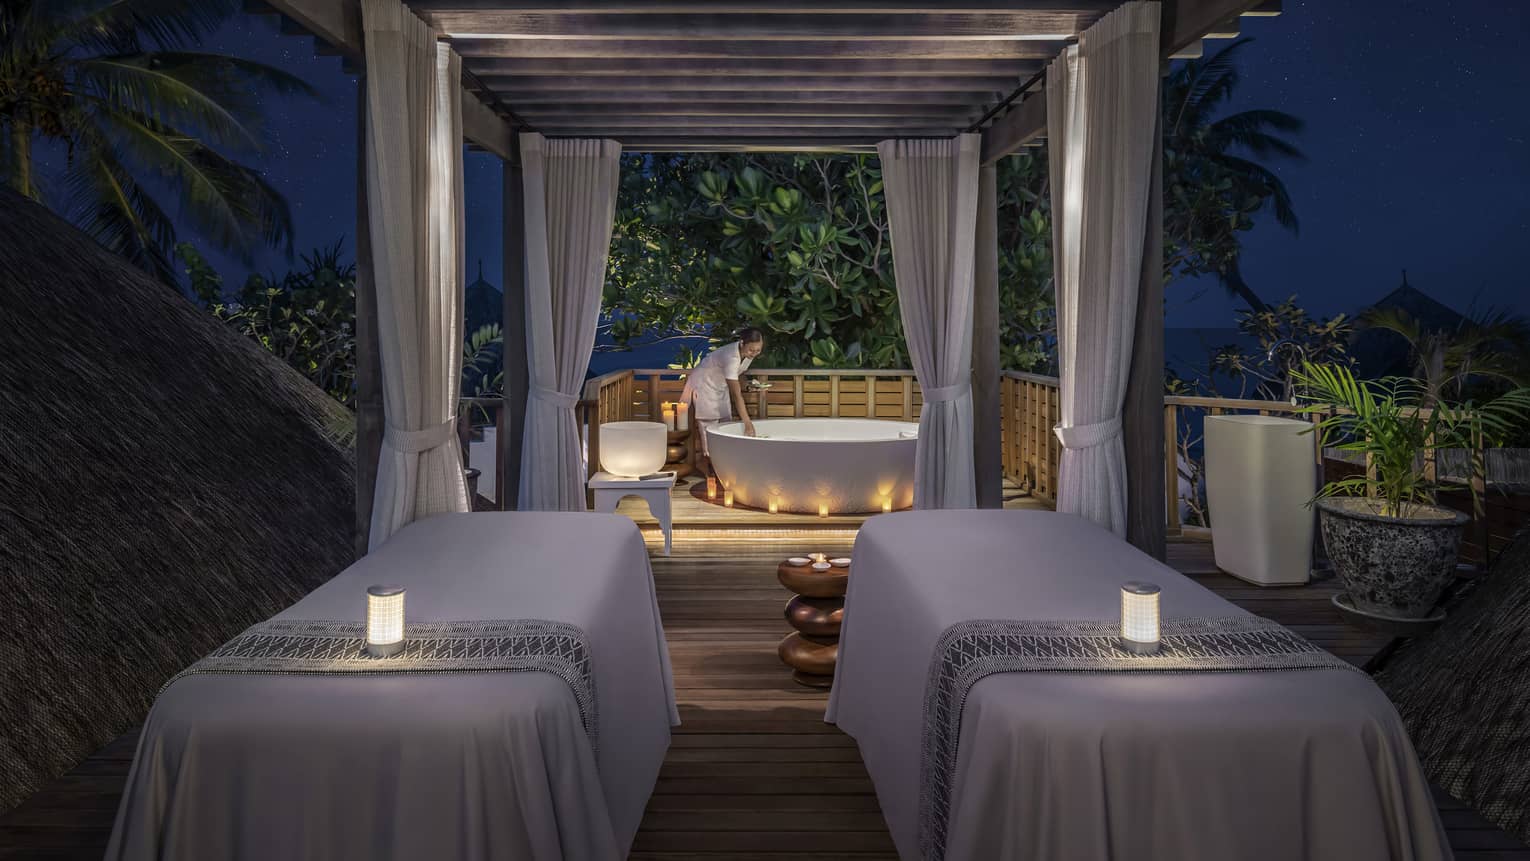 Couples massage beds with glowing candles at outdoor spa pavillion at night